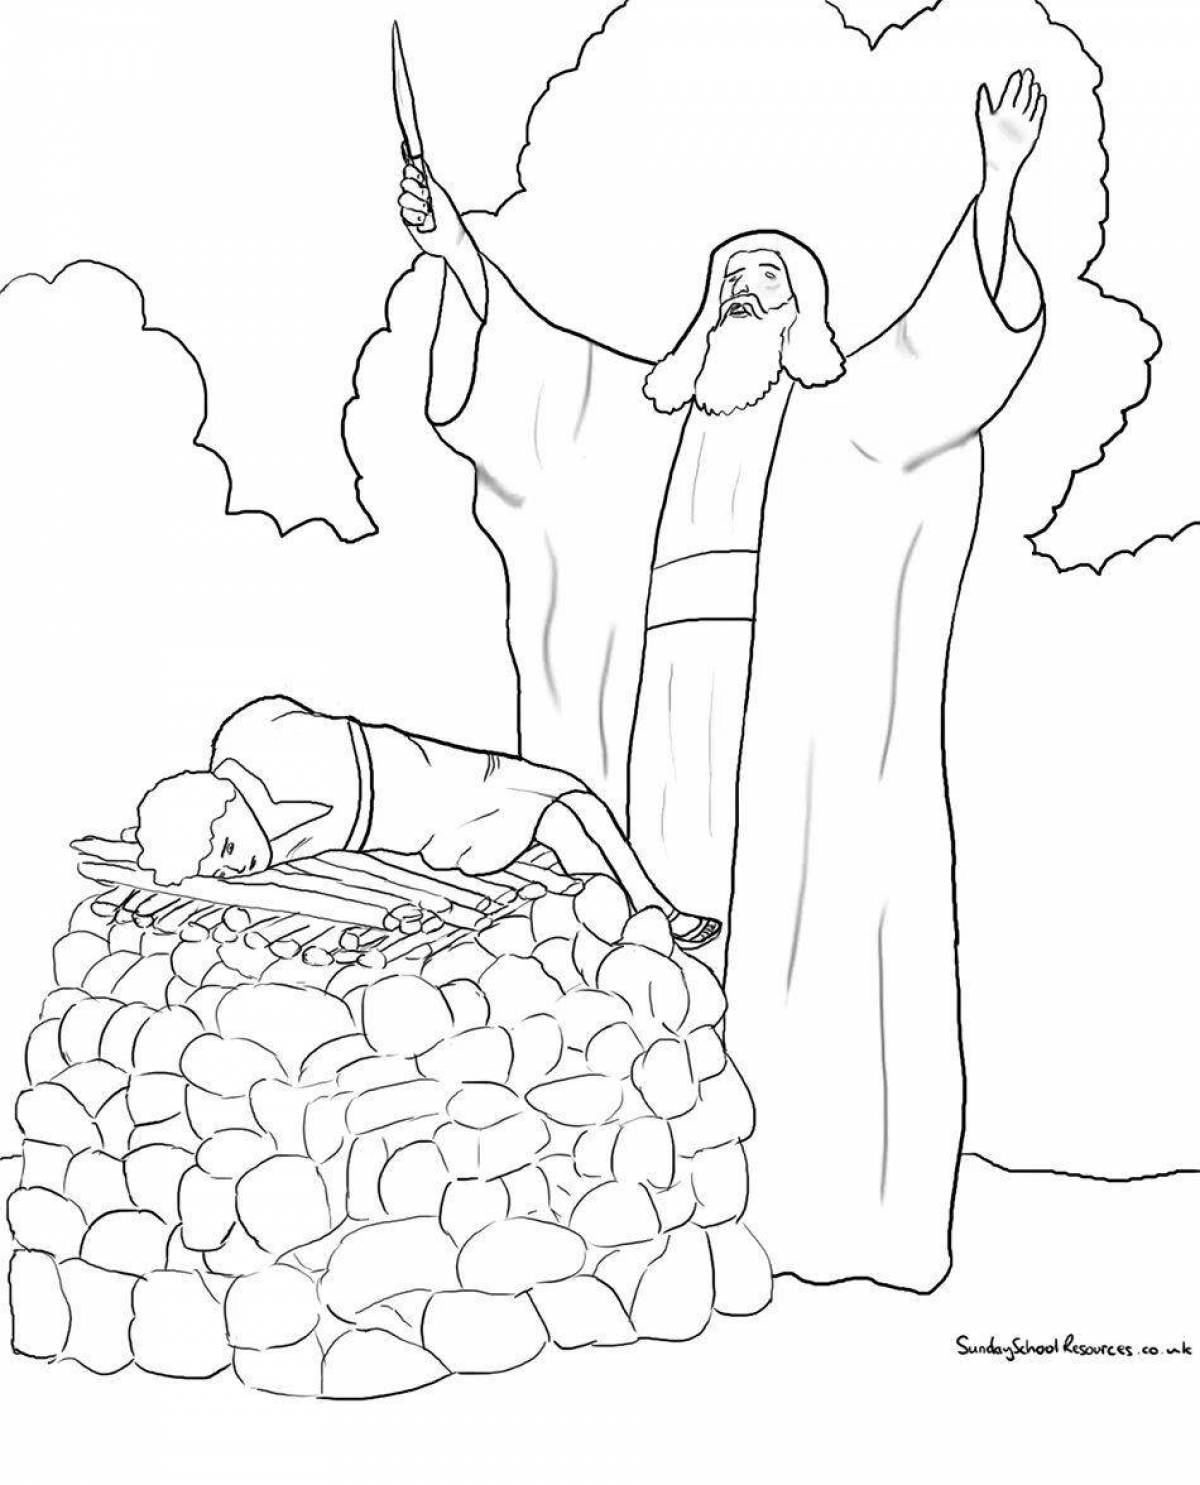 Playful bible coloring book for kids